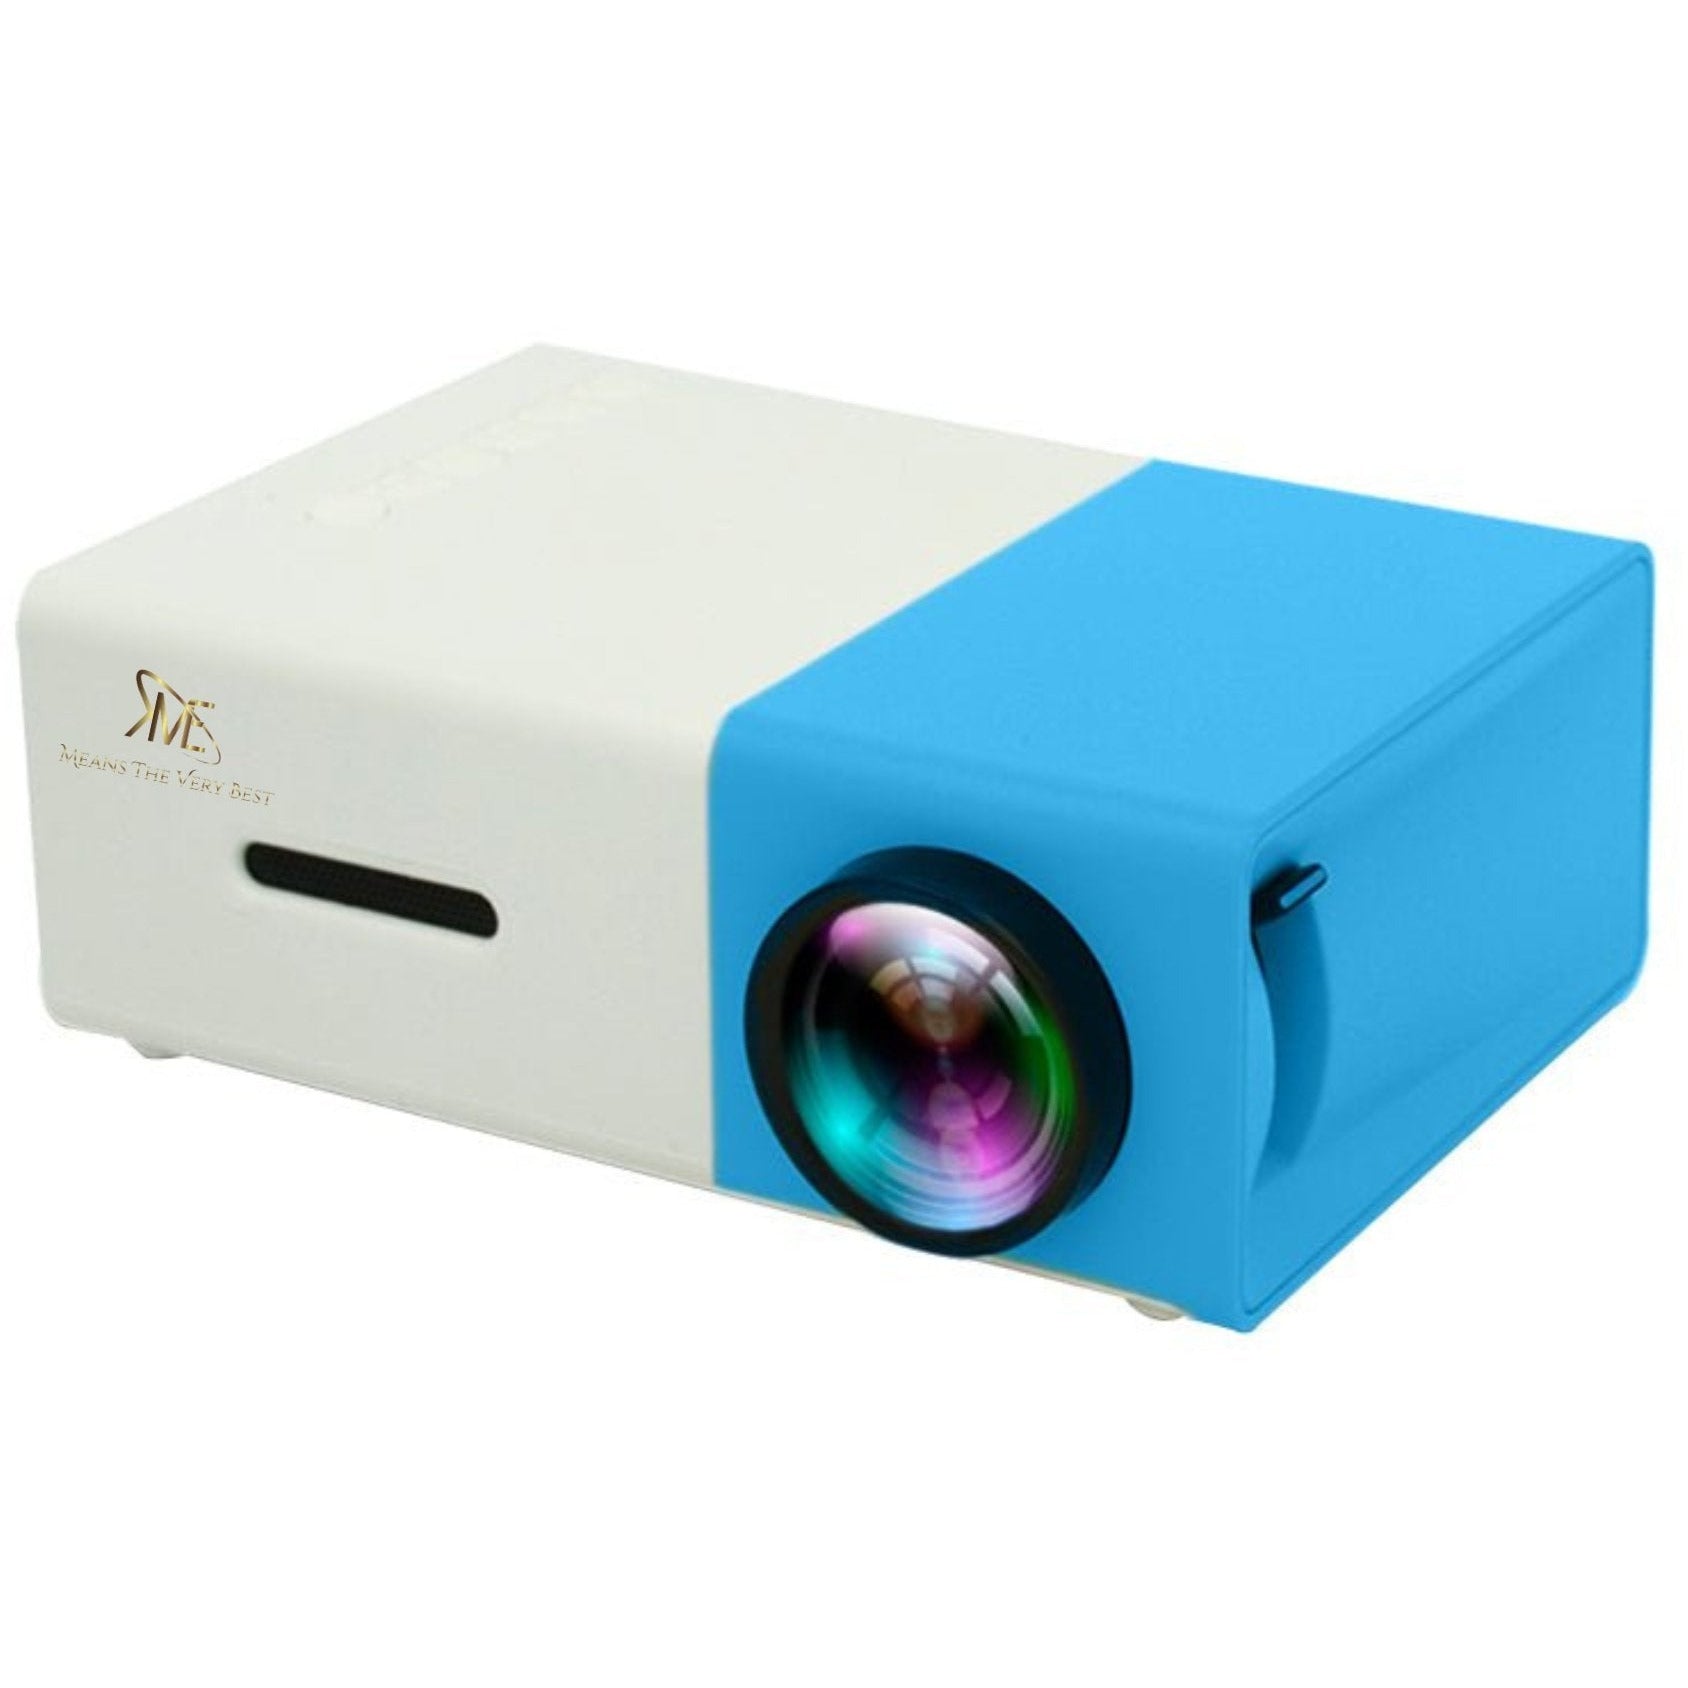 KME means the very best - Smart Projector Videos Movies Multimedia LED Portable Mini Travel Projector - KME means the very best